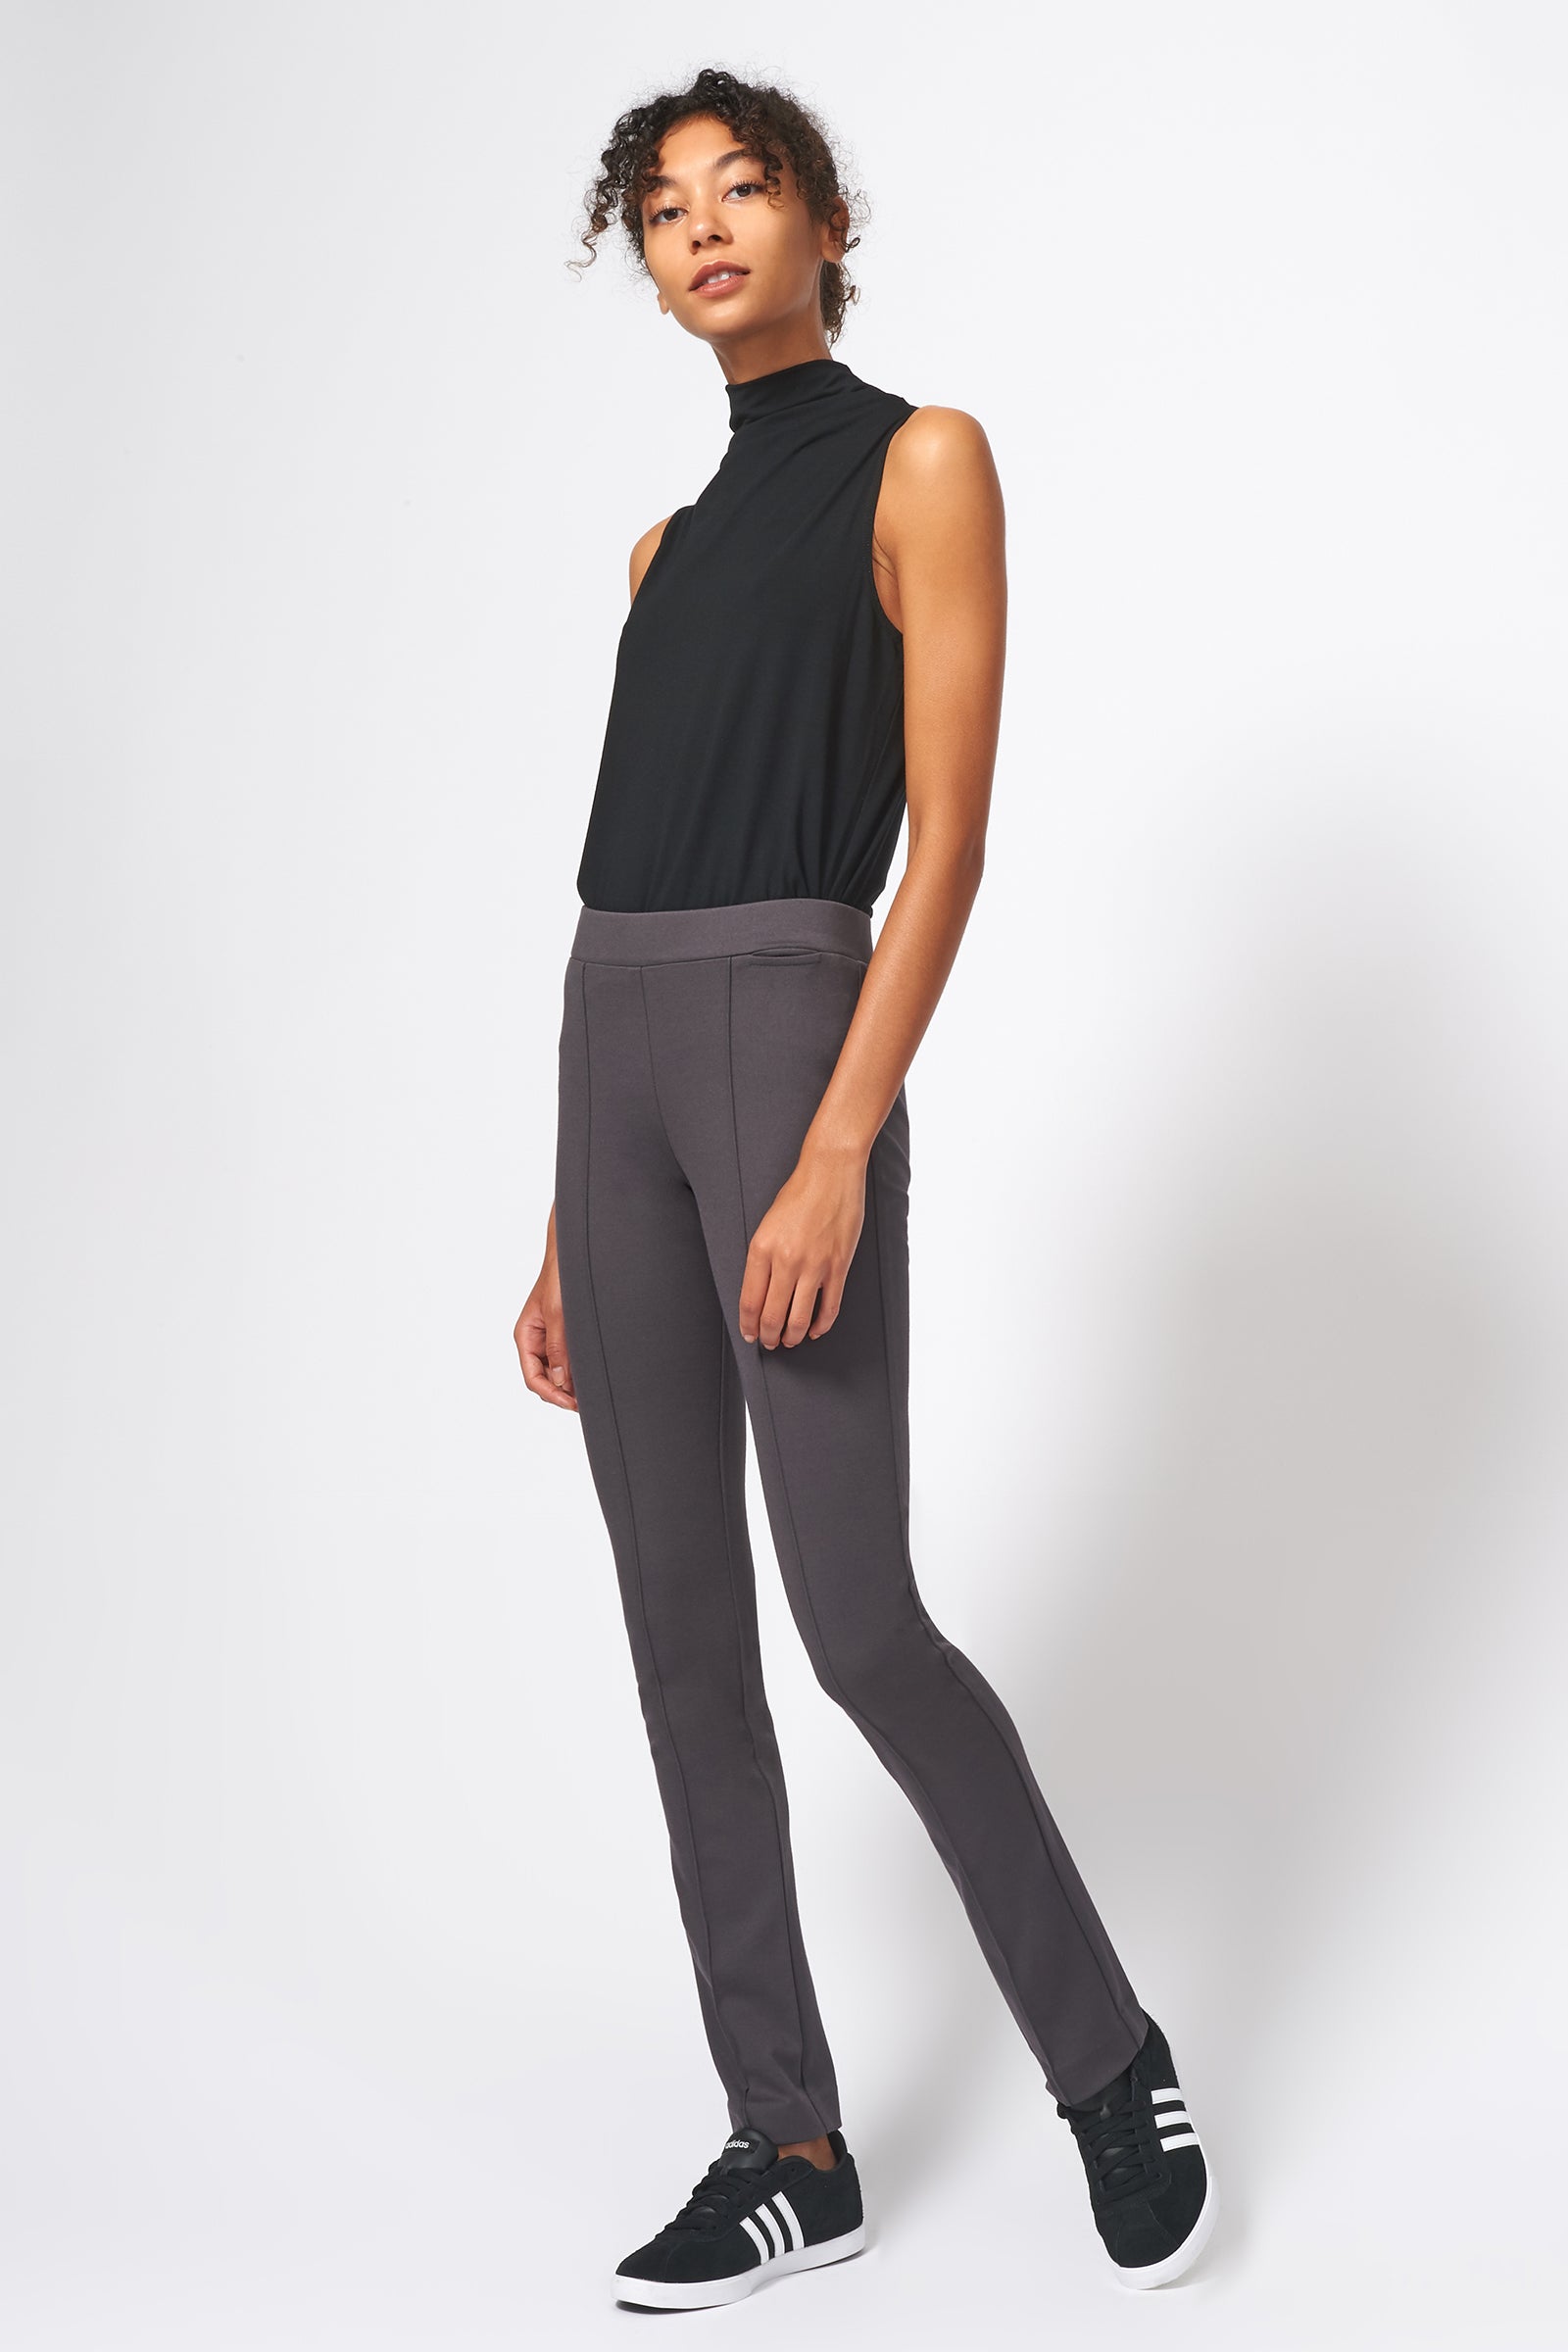 Kal Rieman Pintuck Ponte Straight Leg Pant in Charcoal on Model Front Side View